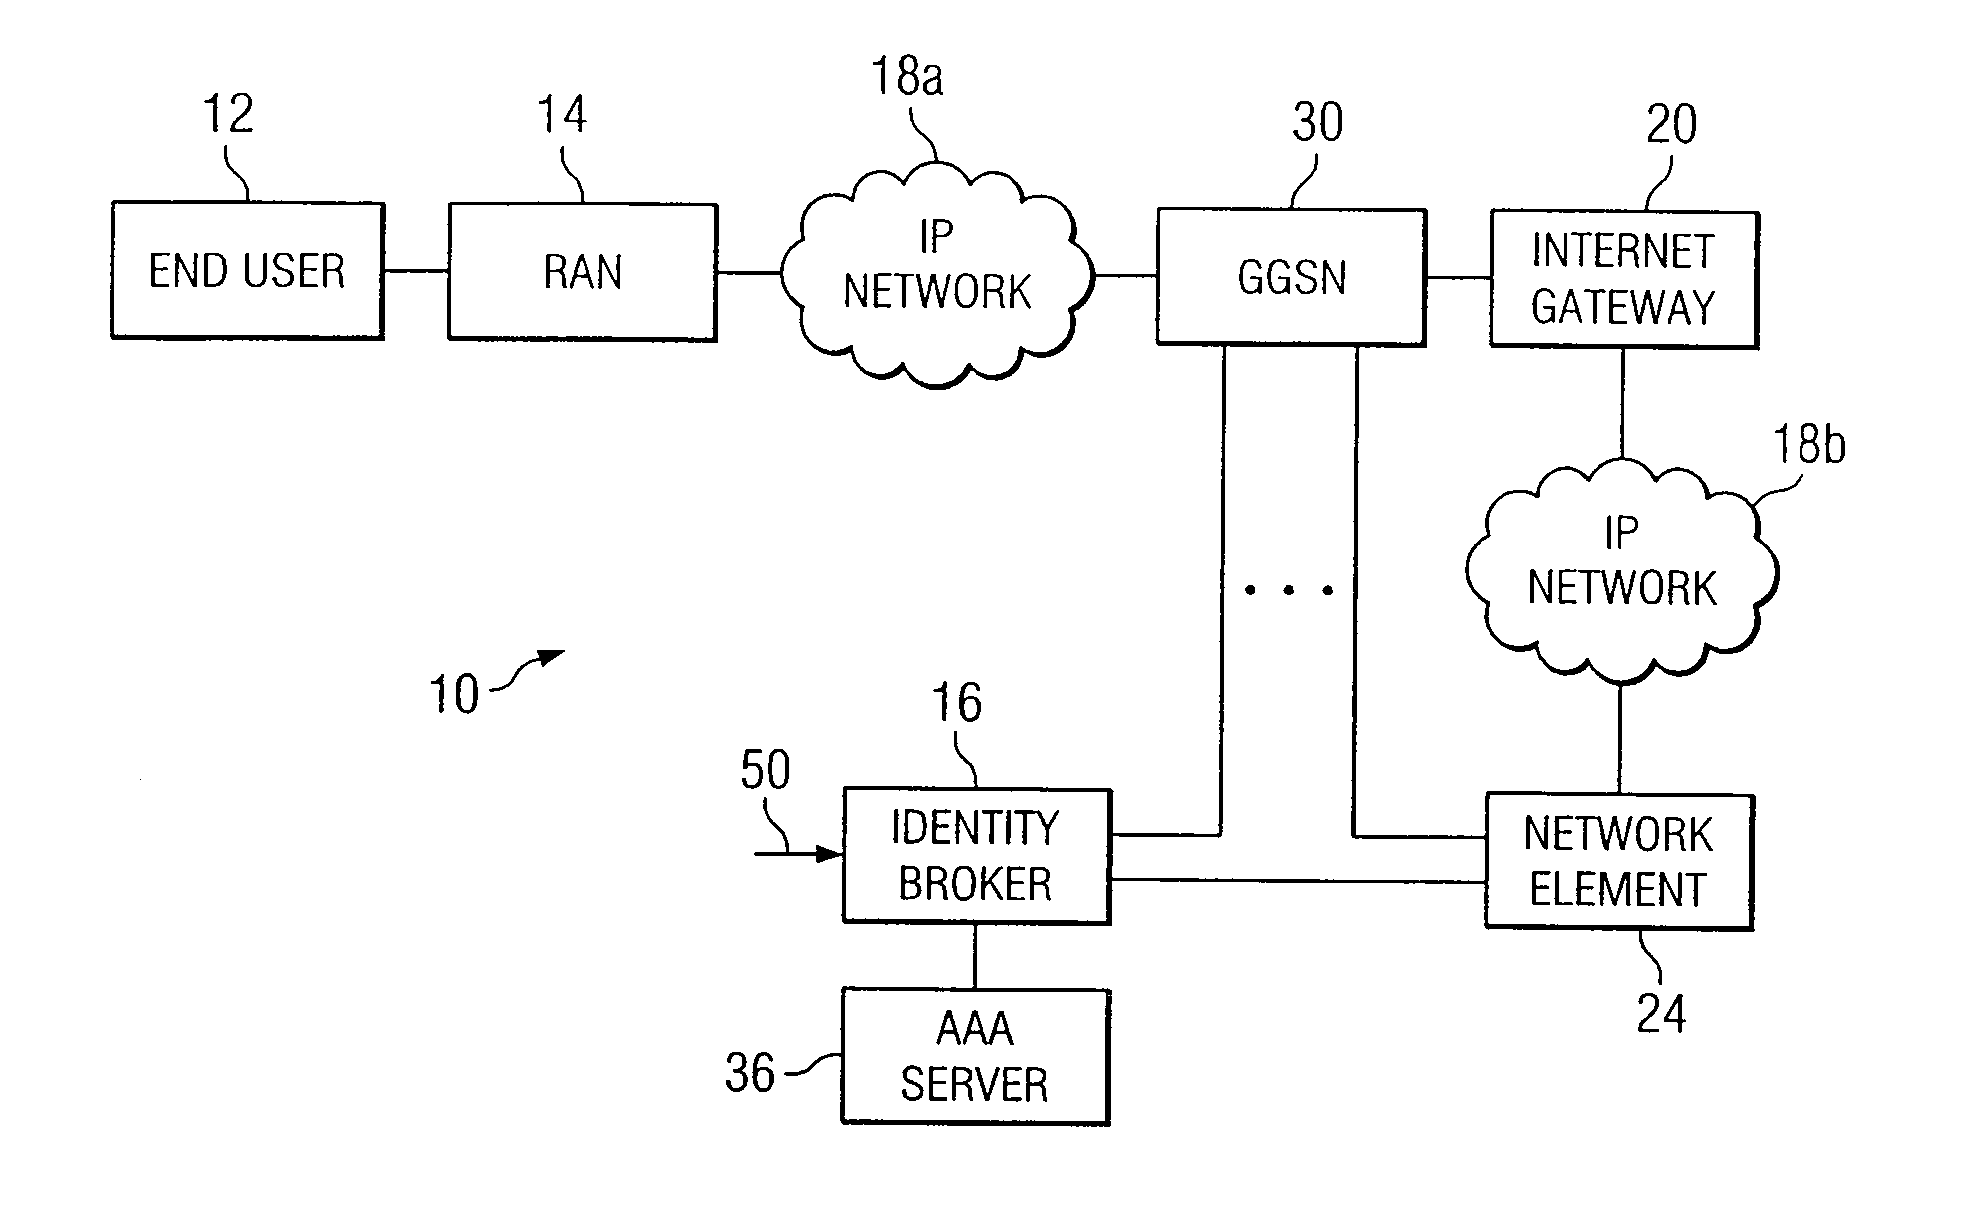 System and Method for Distributing Information in a Network Environment